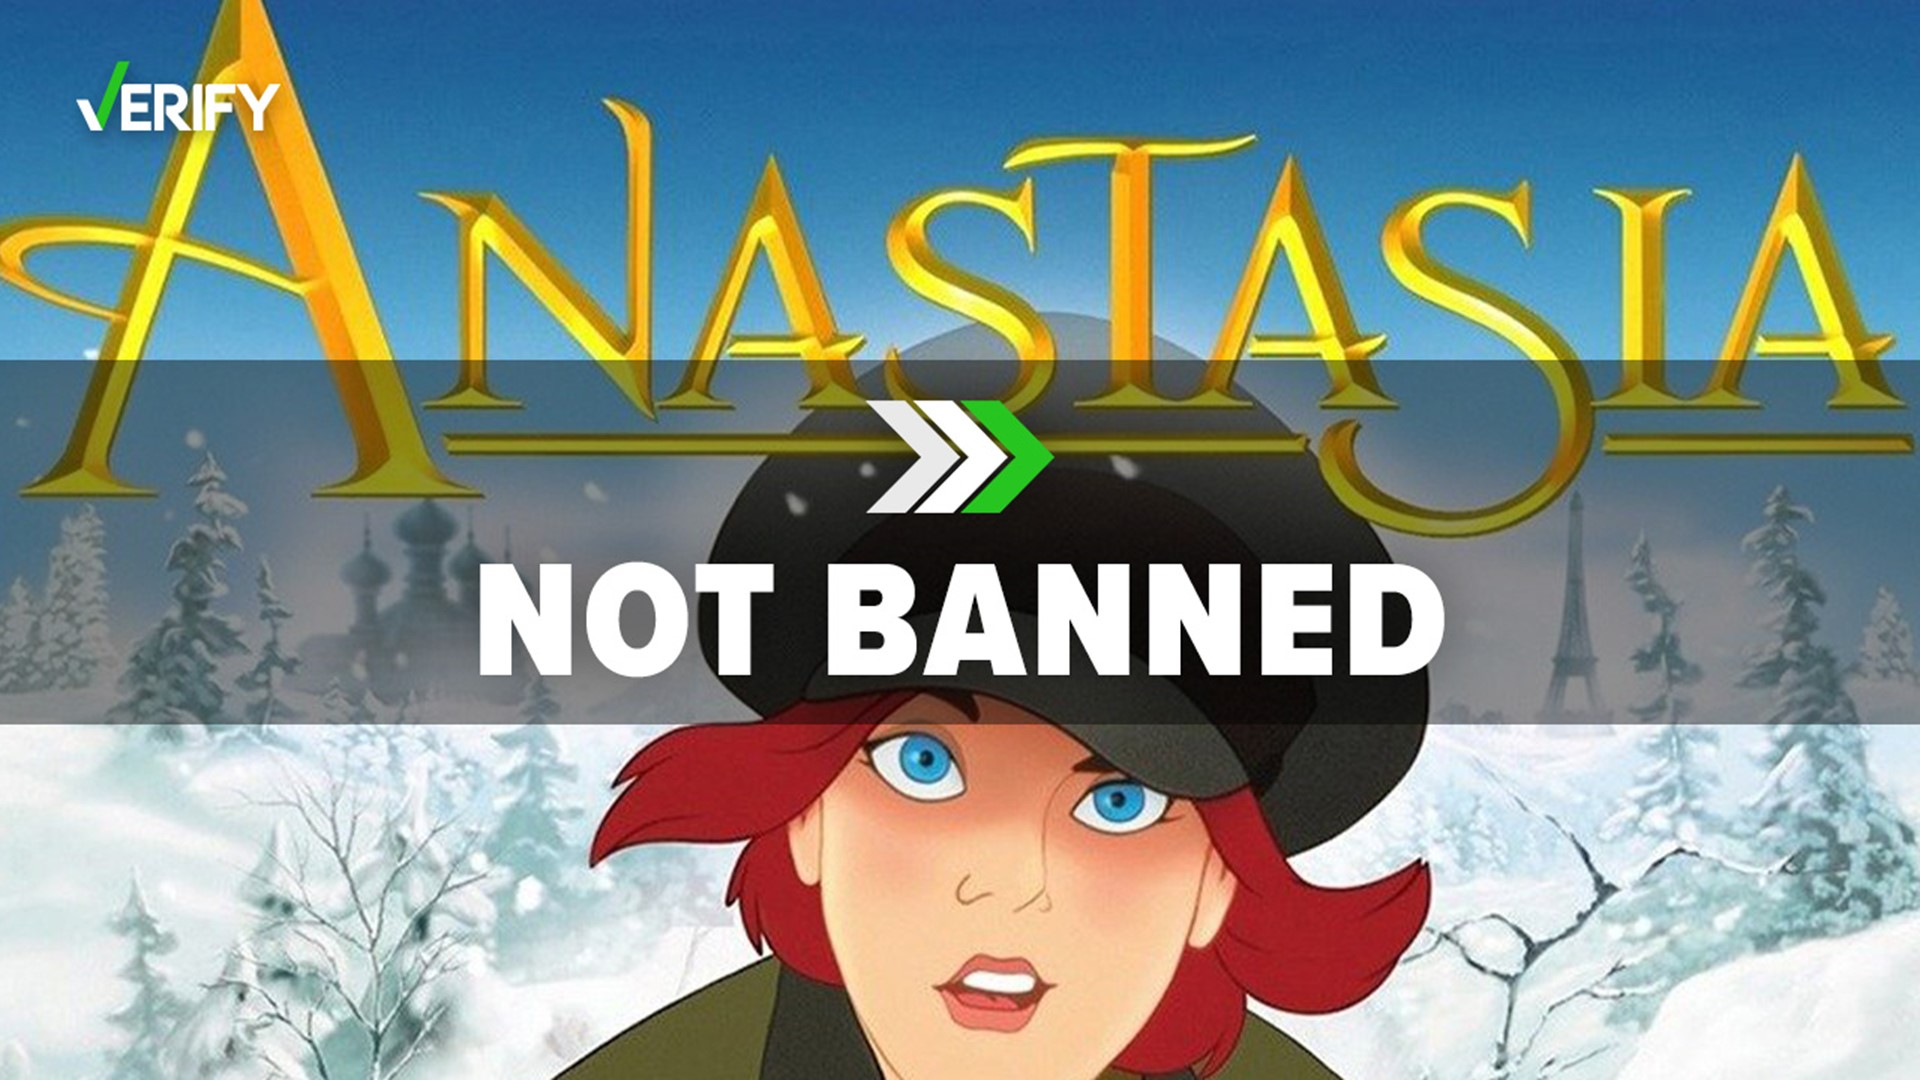 The 1997 animated film, “Anastasia,” was removed from Disney+ in the U.S. due to pre-existing licensing deals. On March 18, it will be available to stream on Starz.